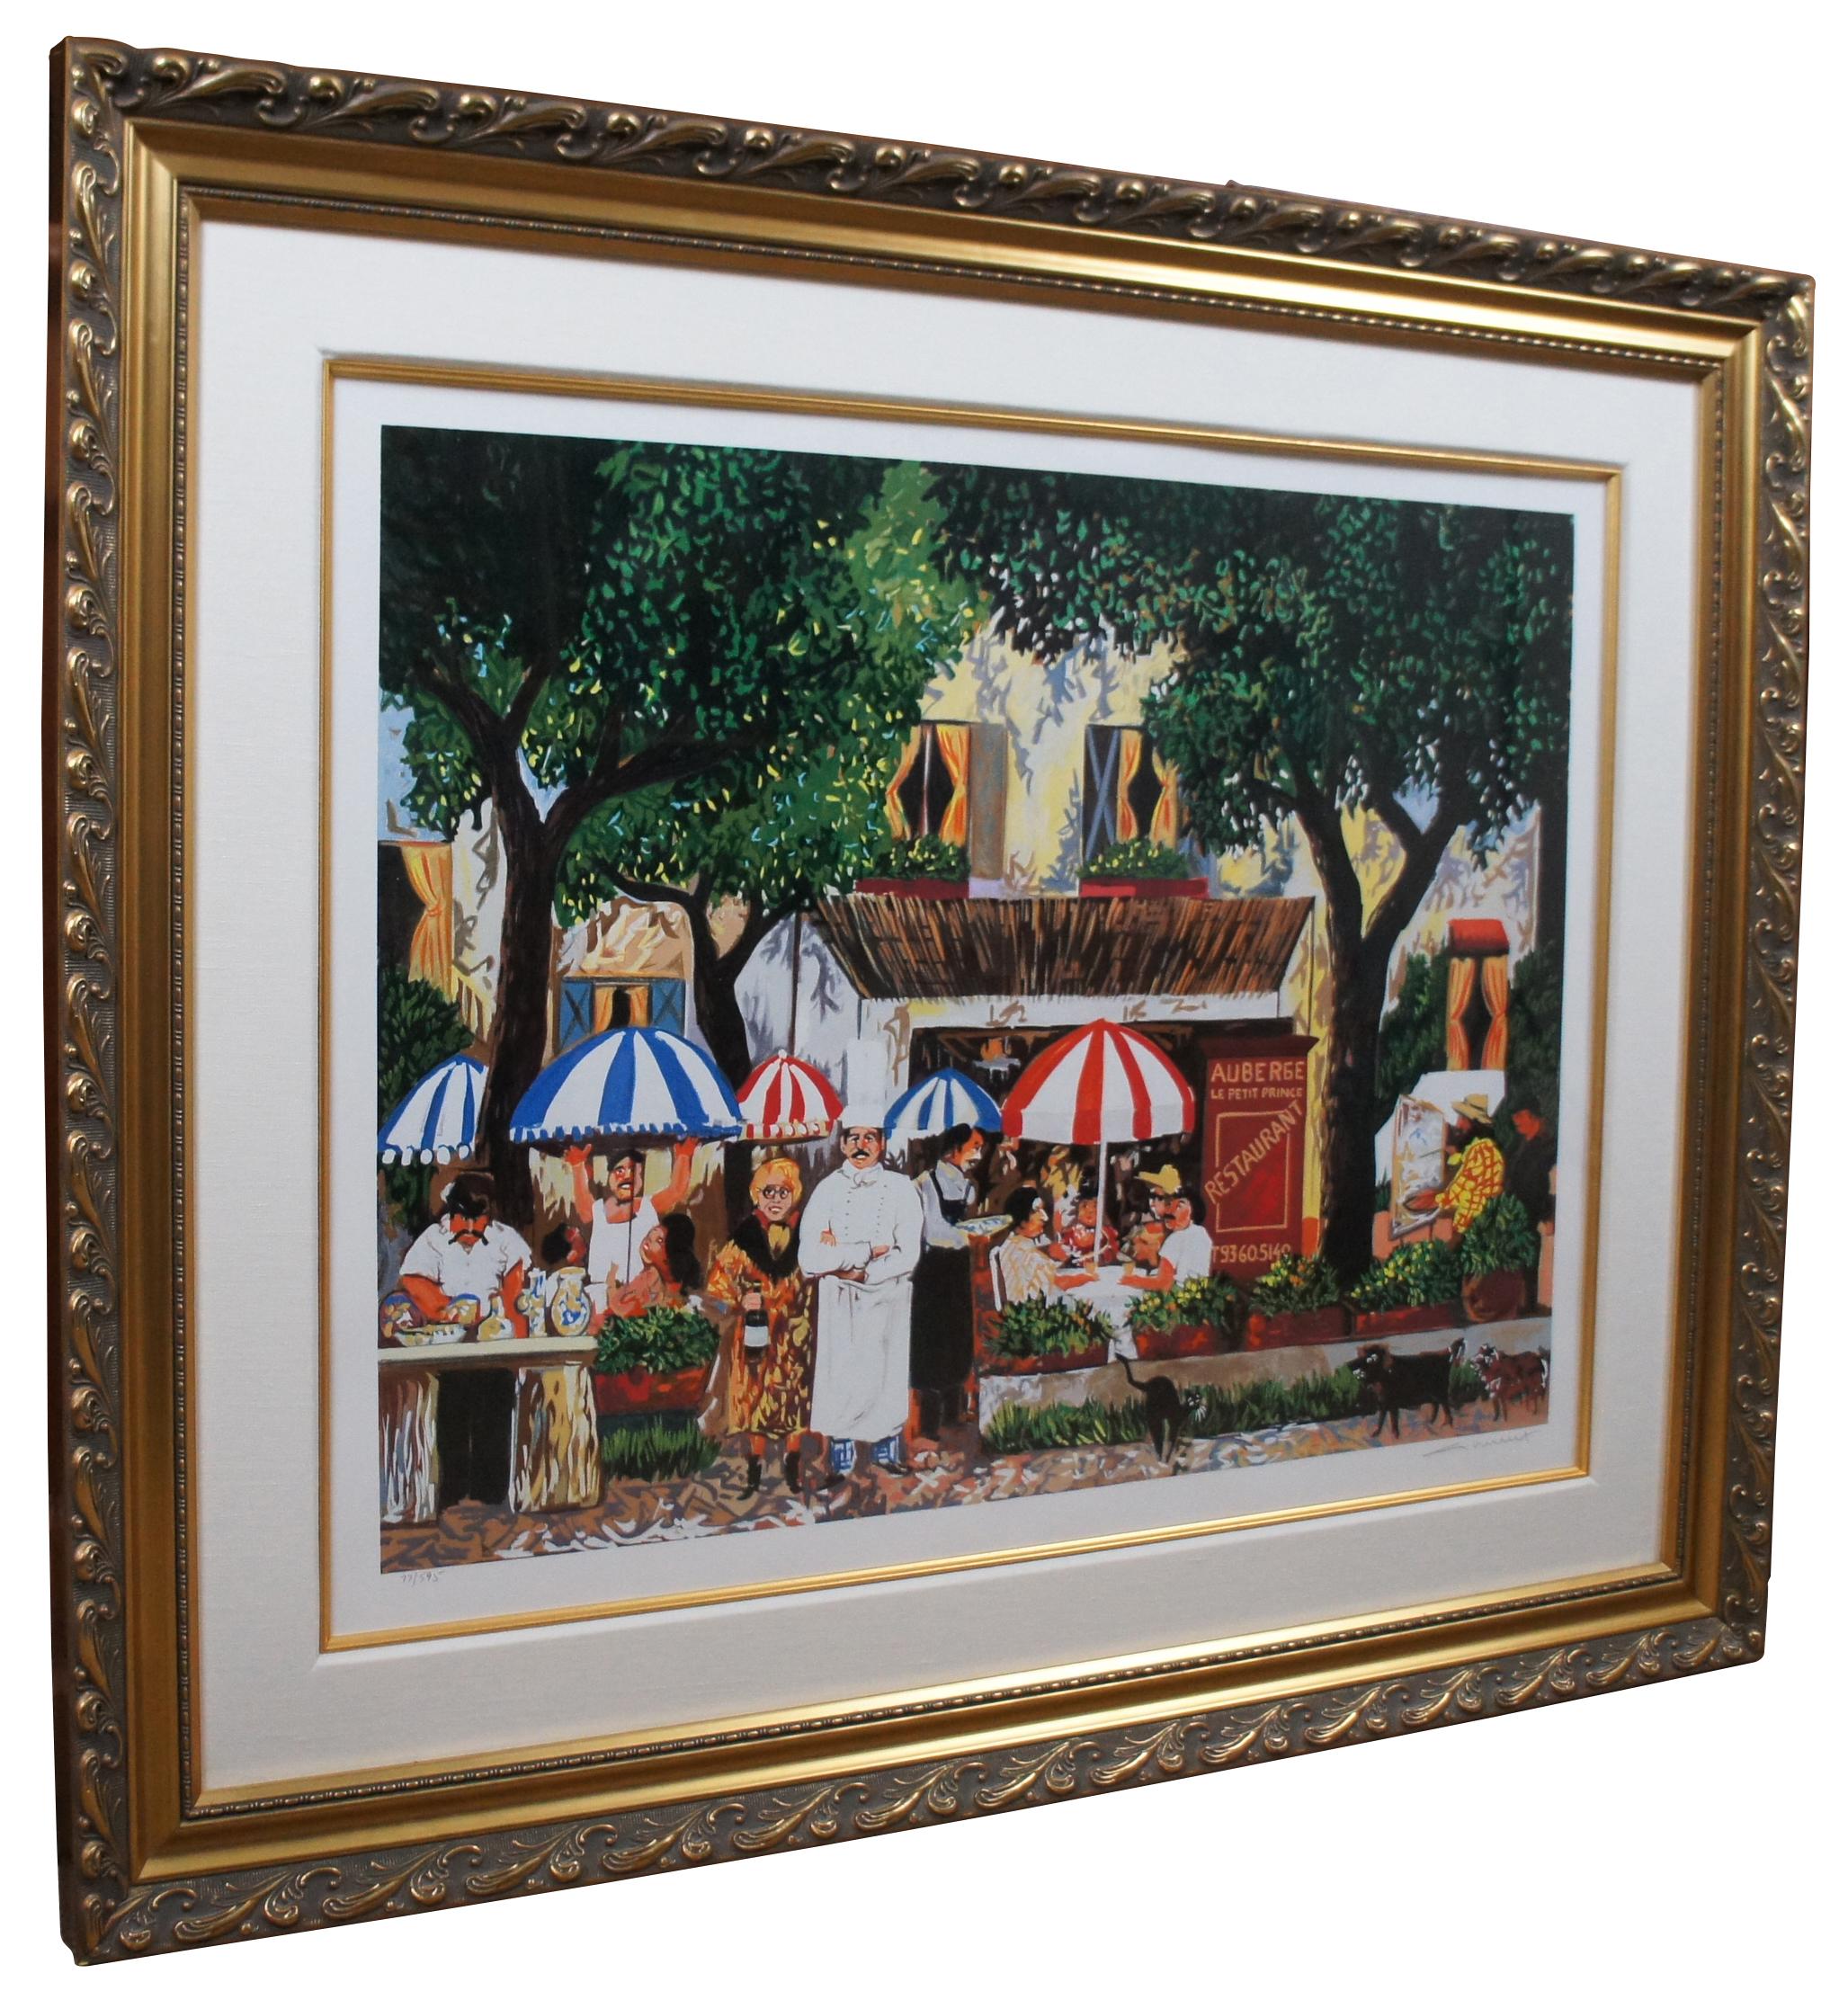 French Provincial Guy Buffet Le Petit Prince Serigraph French Bistro Restaurant Cafe Auberge